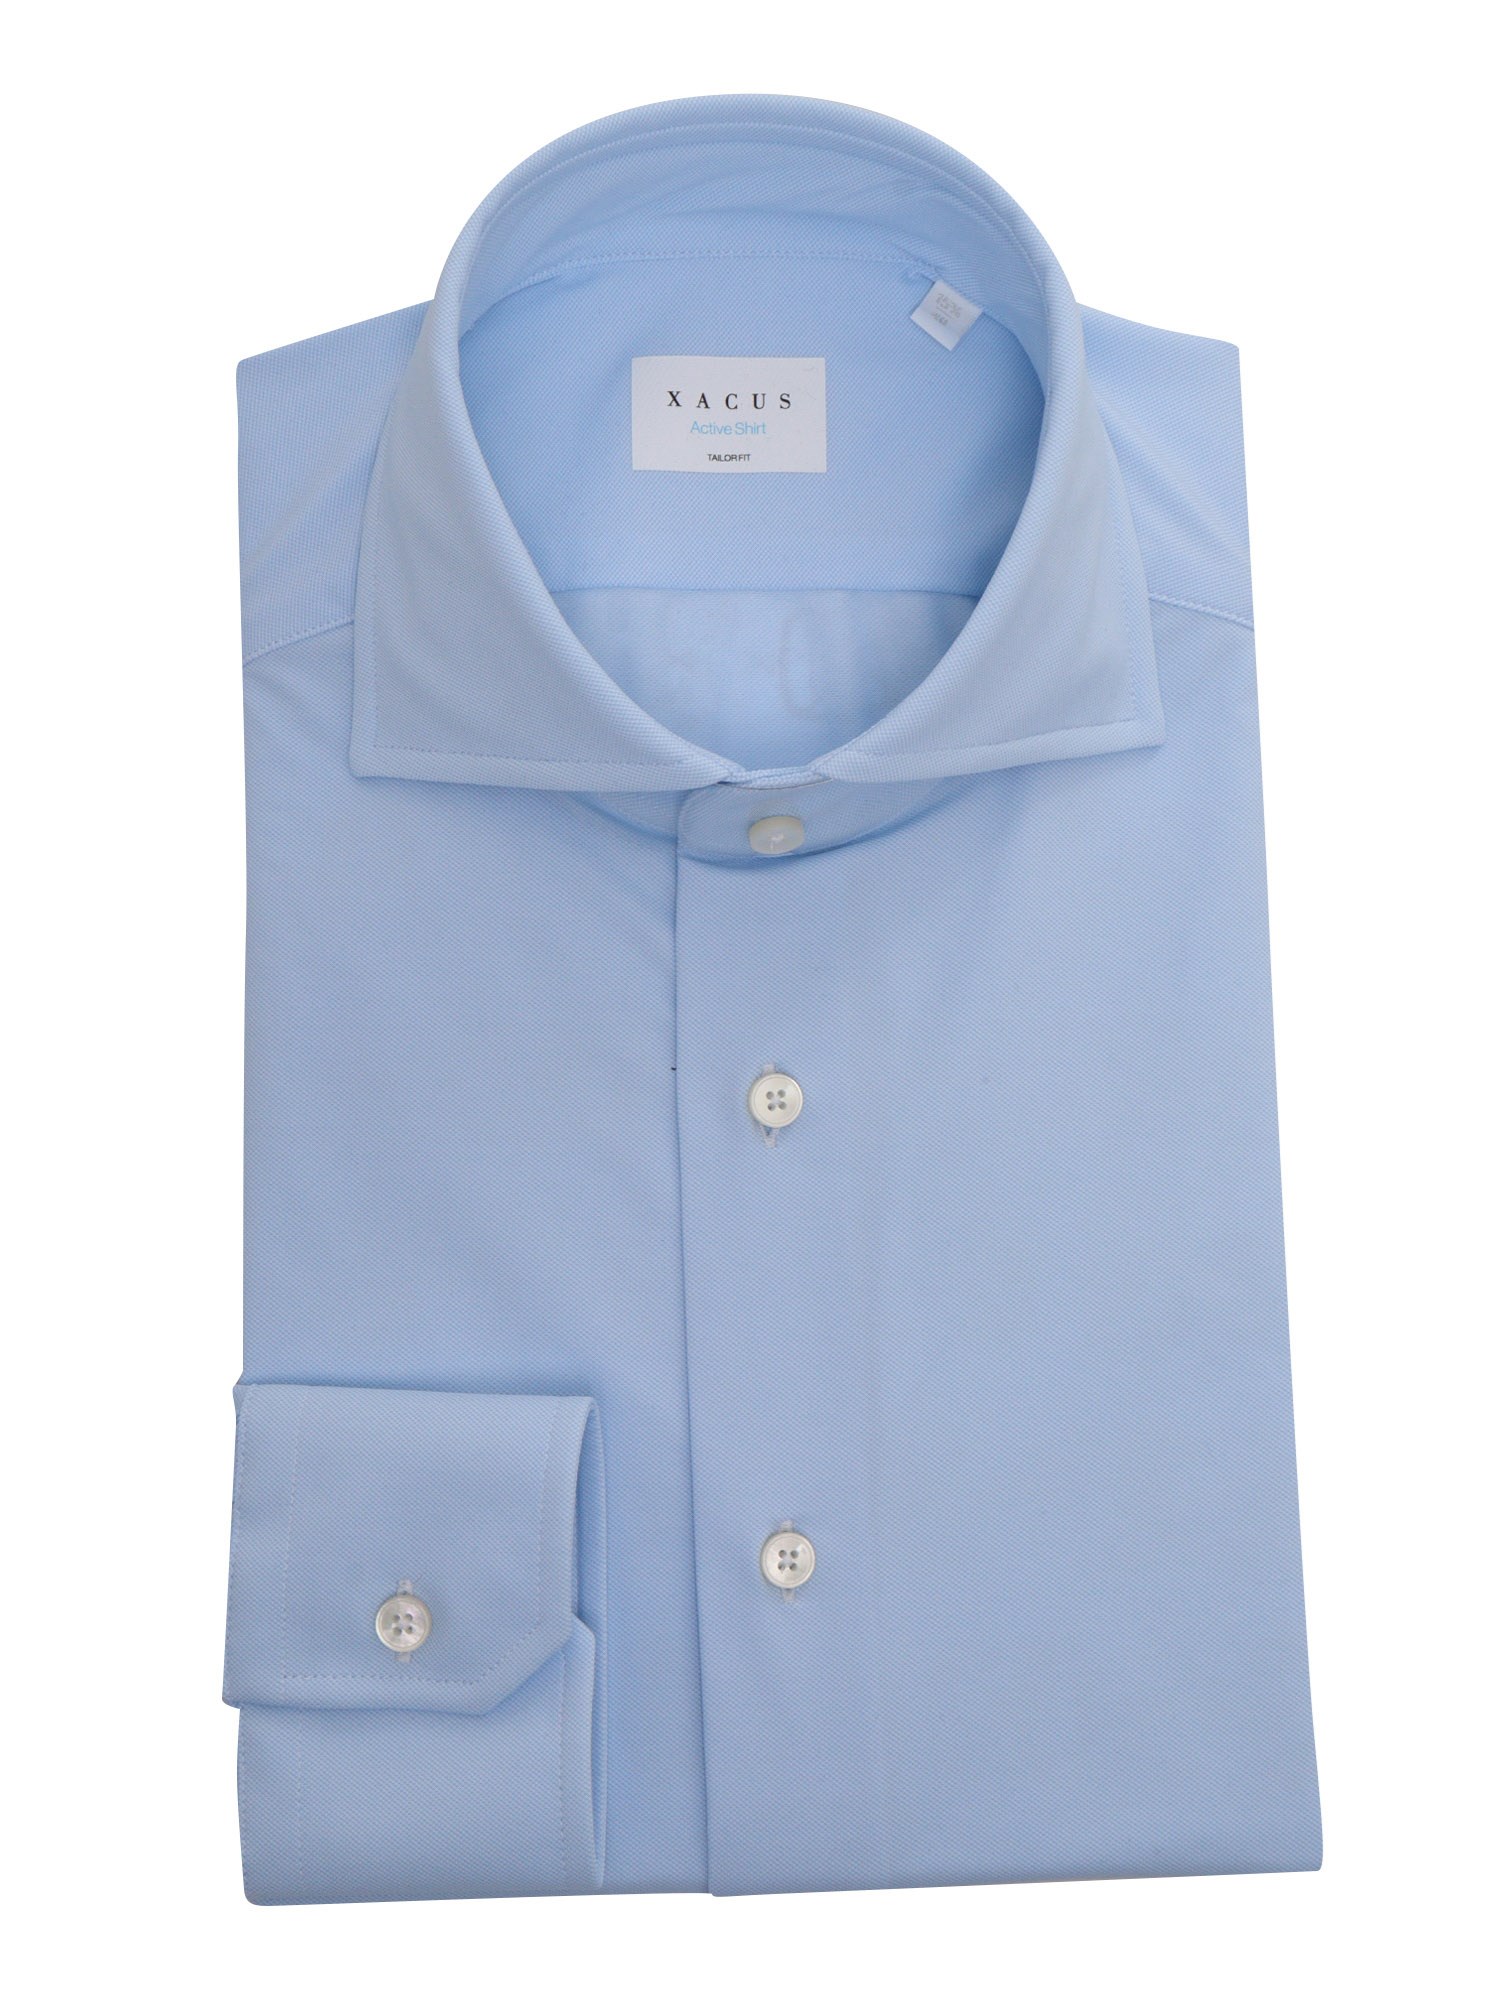 Xacus Light Blue Striped Shirt With Pocket In Multi